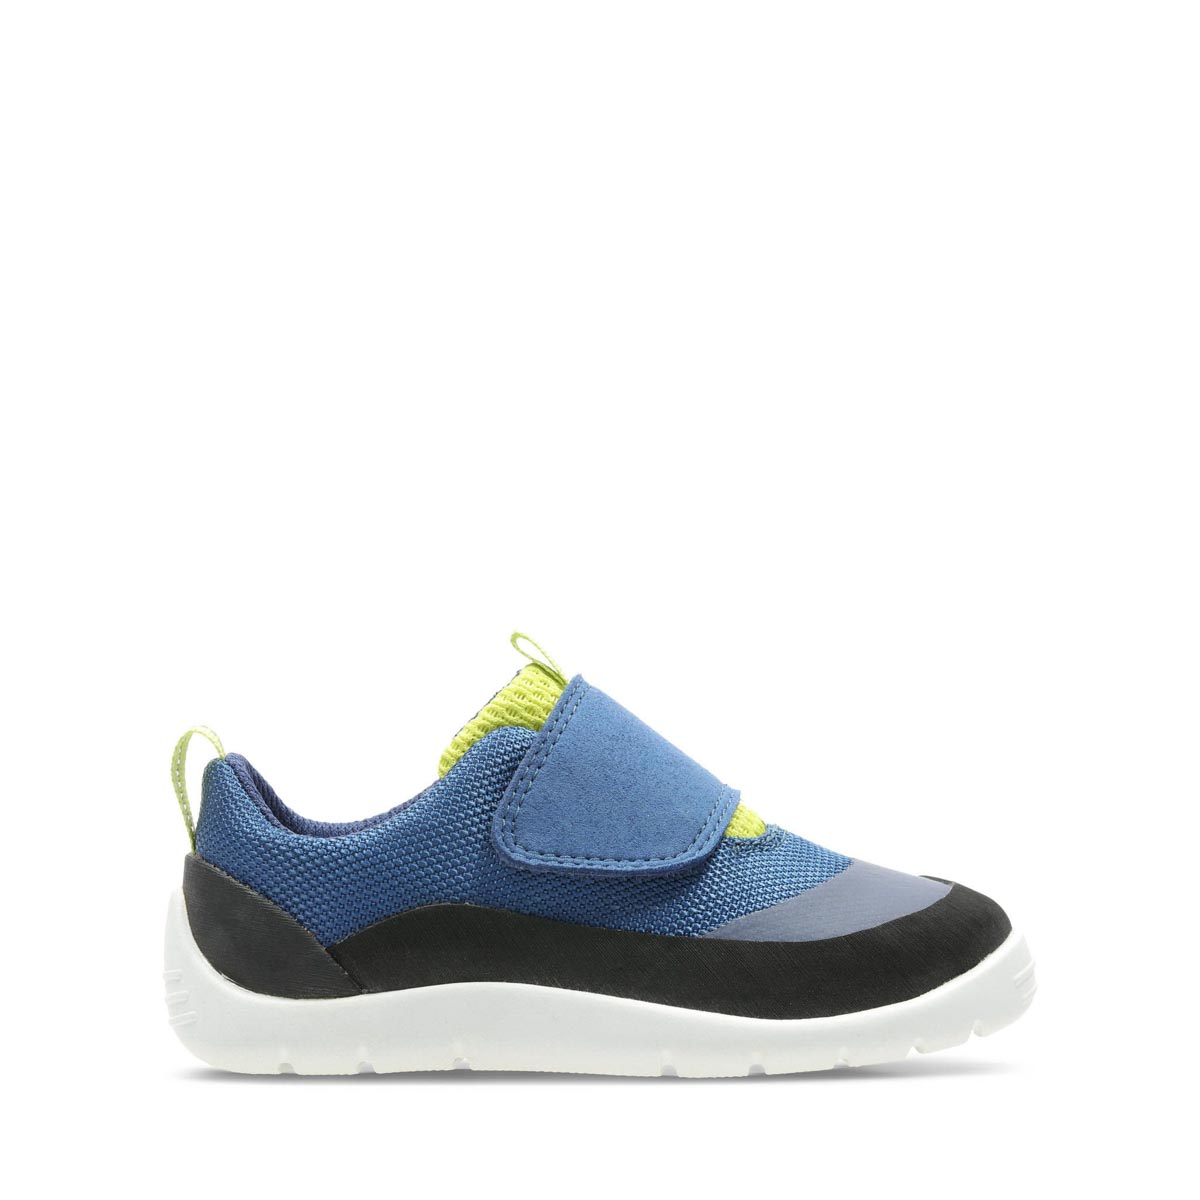 Clarks Play Trail T G Fit Blue trainers